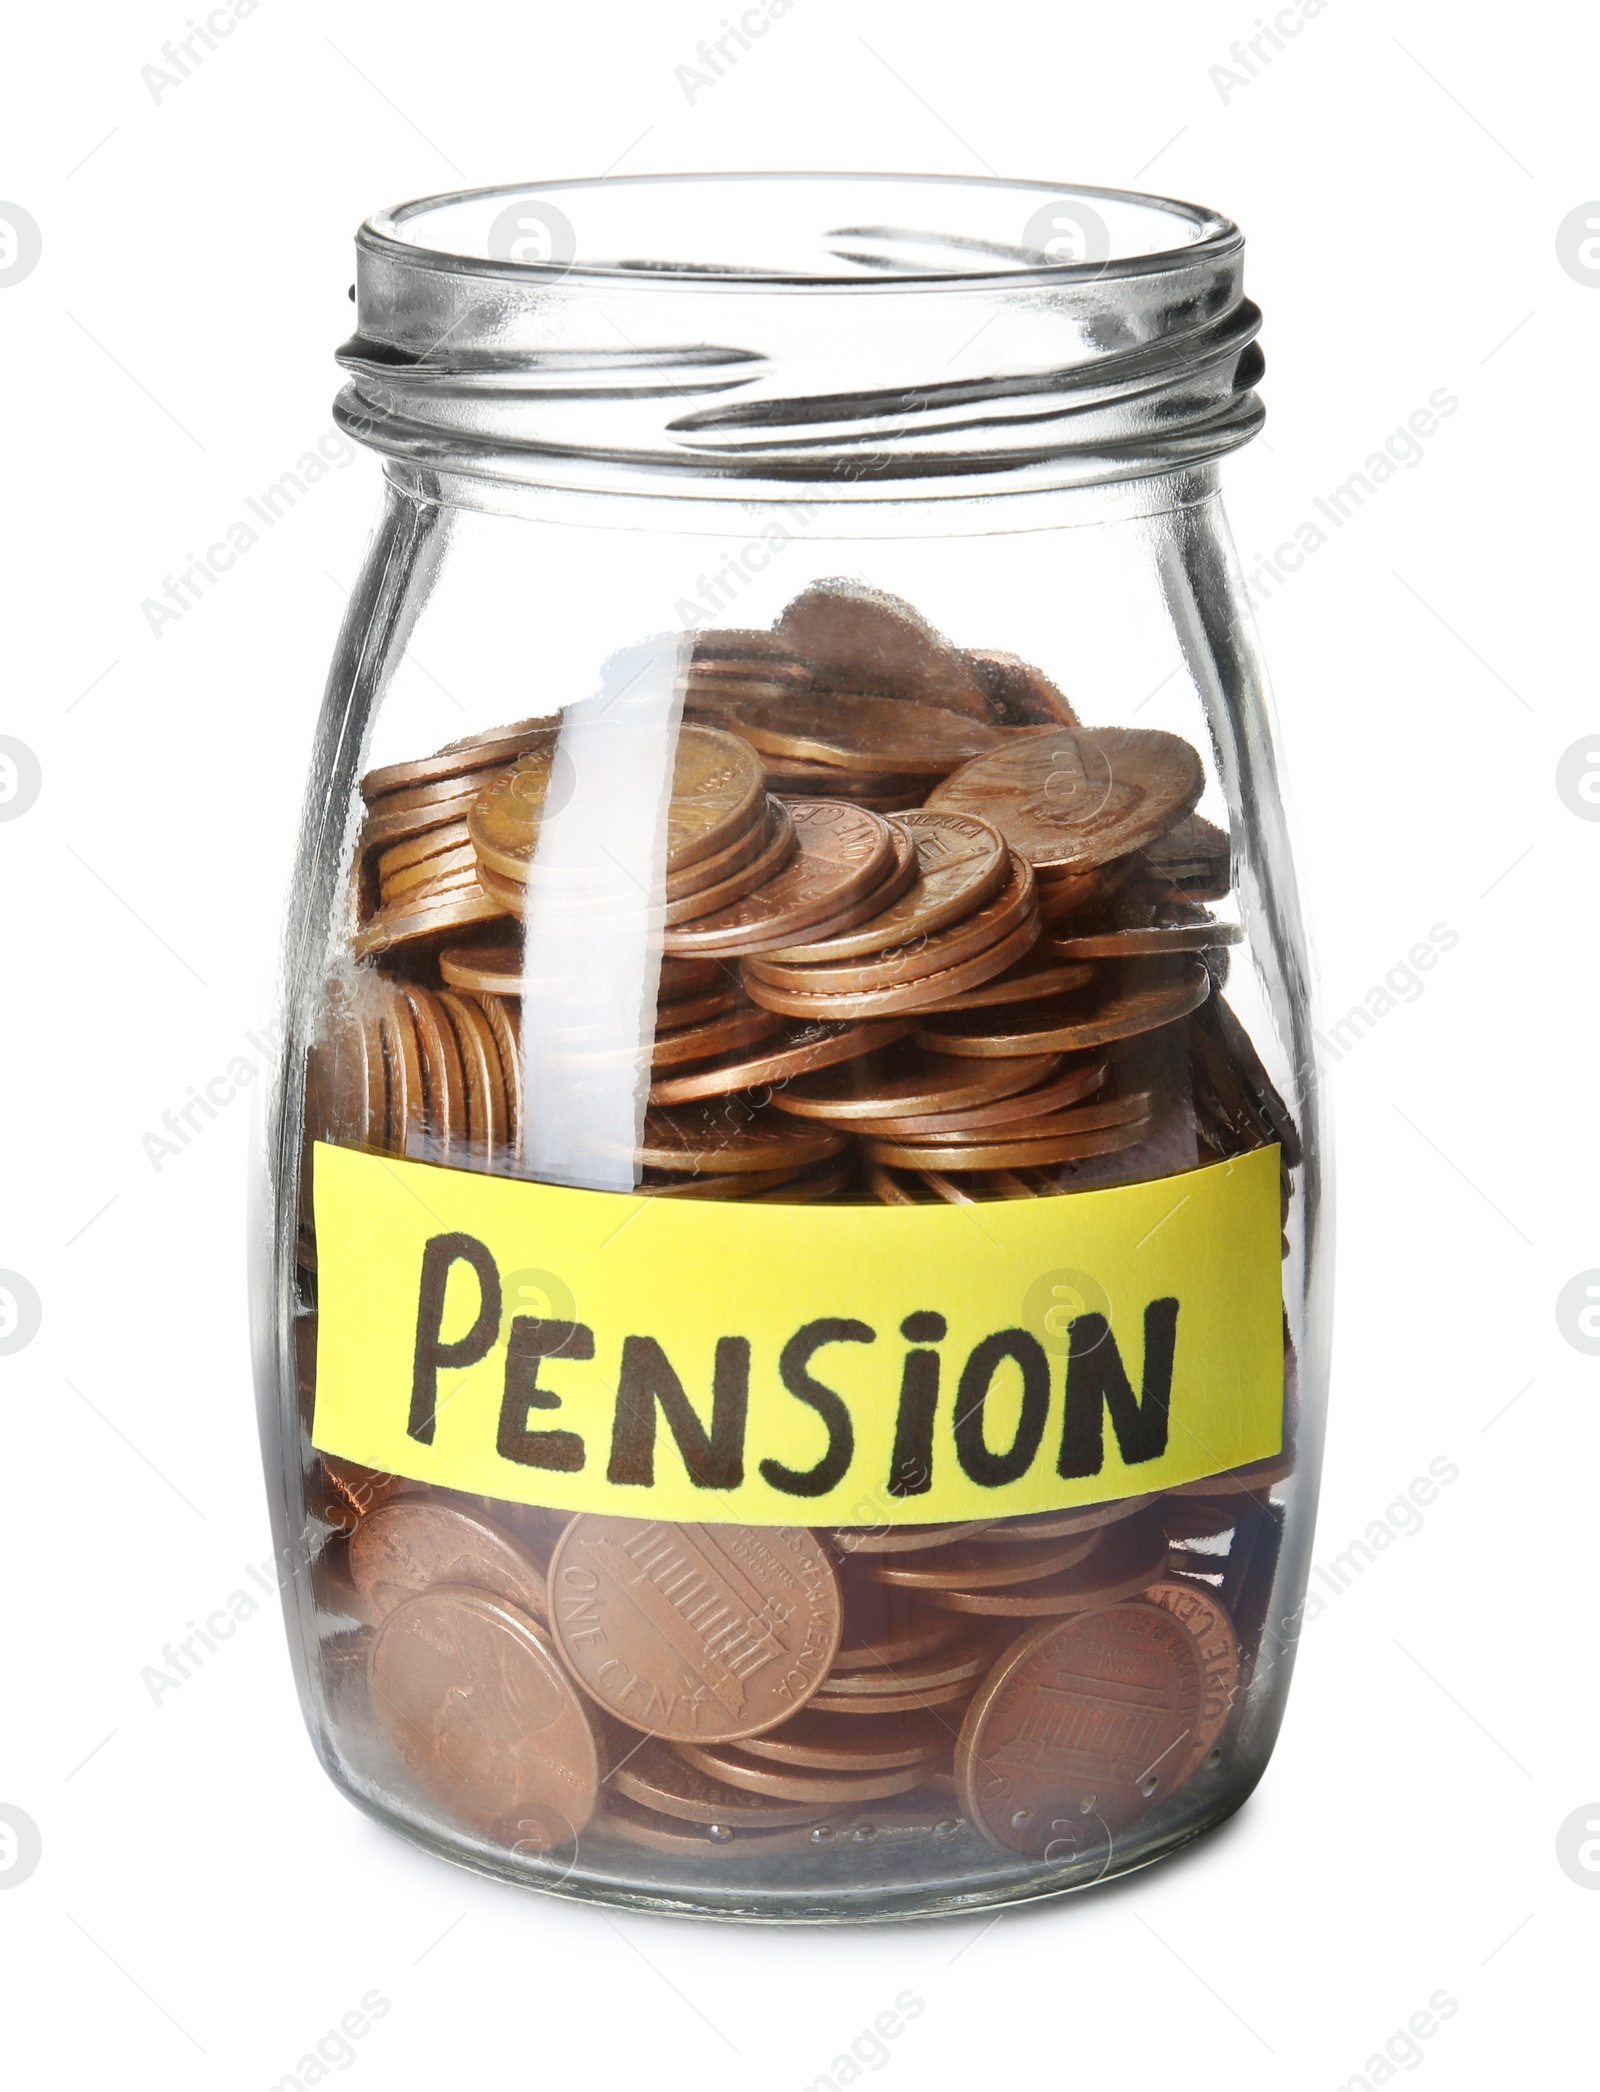 Photo of Glass jar with label PENSION and coins on white background